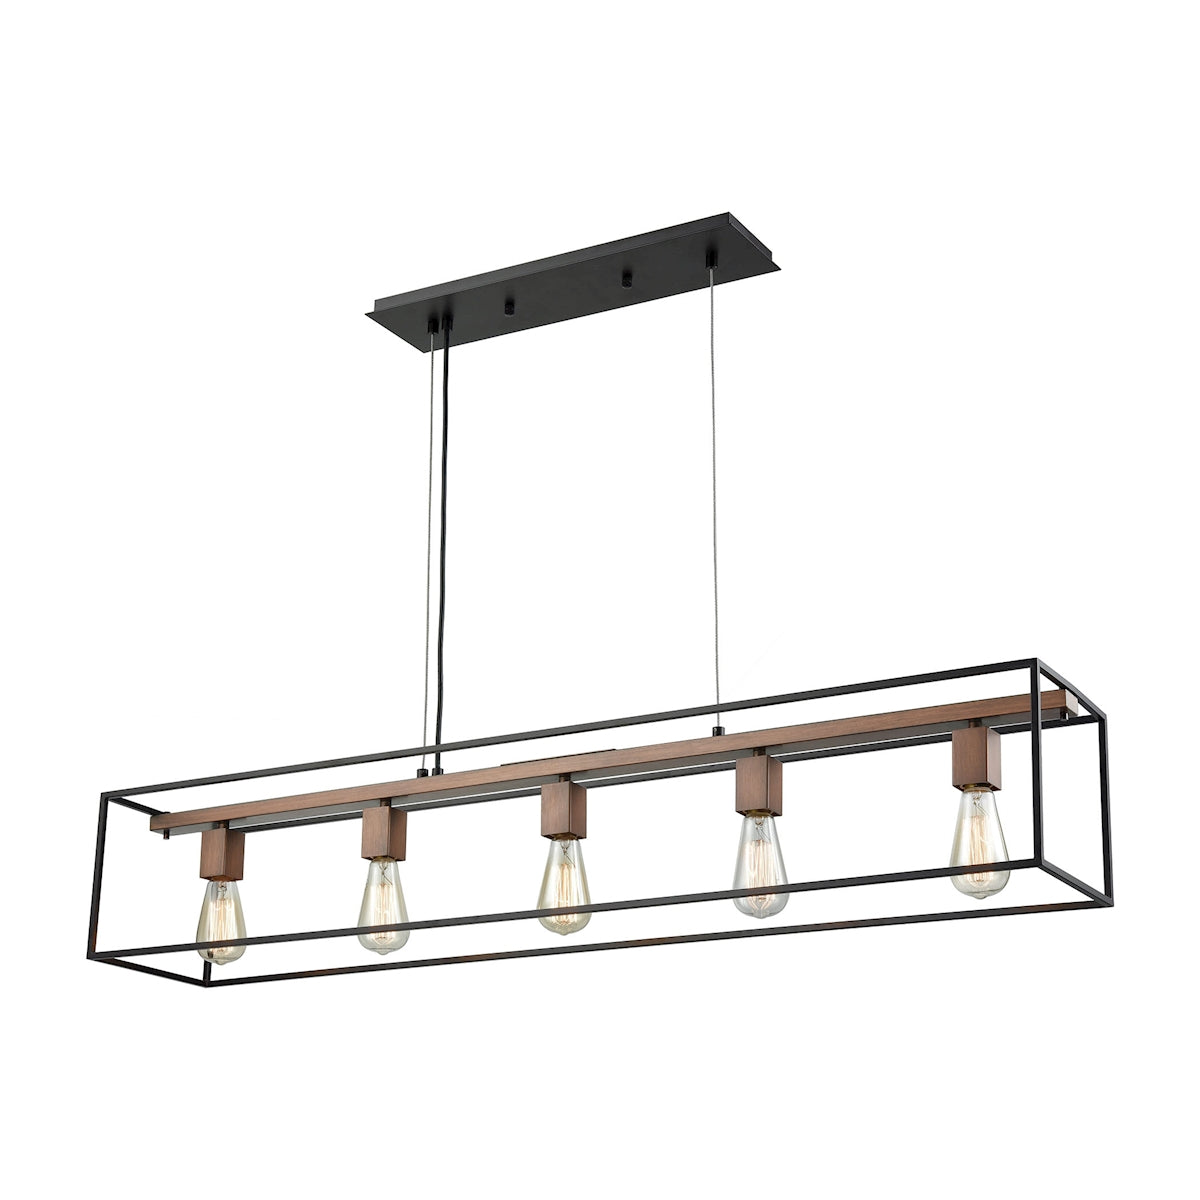 ELK Lighting 14463/5 Rigby 5-Light Chandelier in Oil Rubbed Bronze and Tarnished Brass